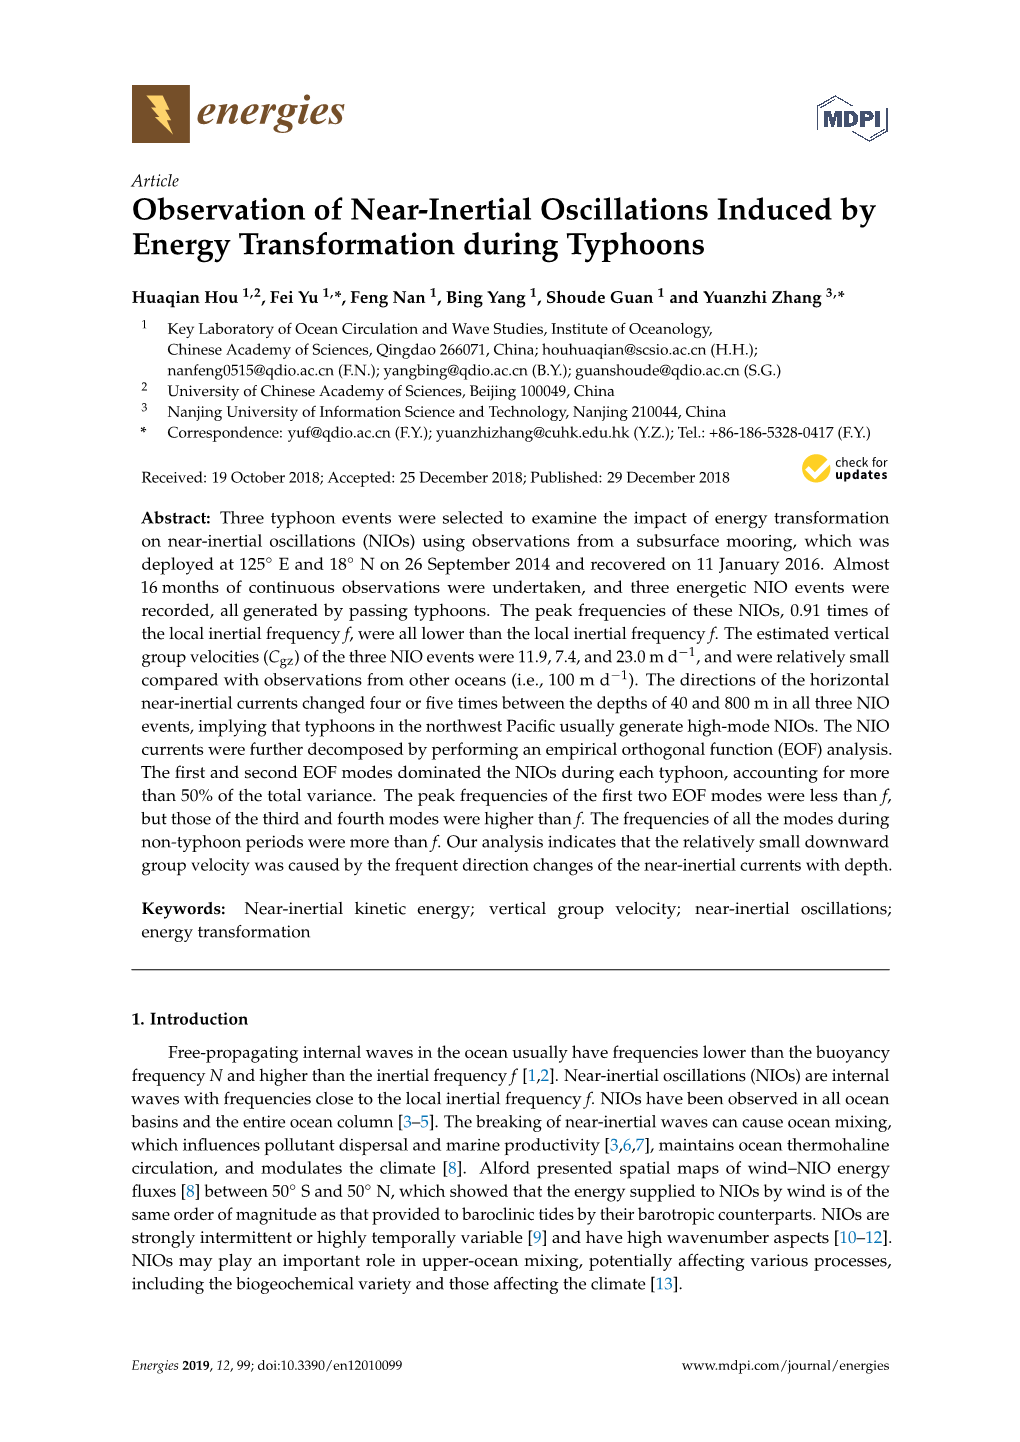 Observation of Near-Inertial Oscillations Induced by Energy Transformation During Typhoons